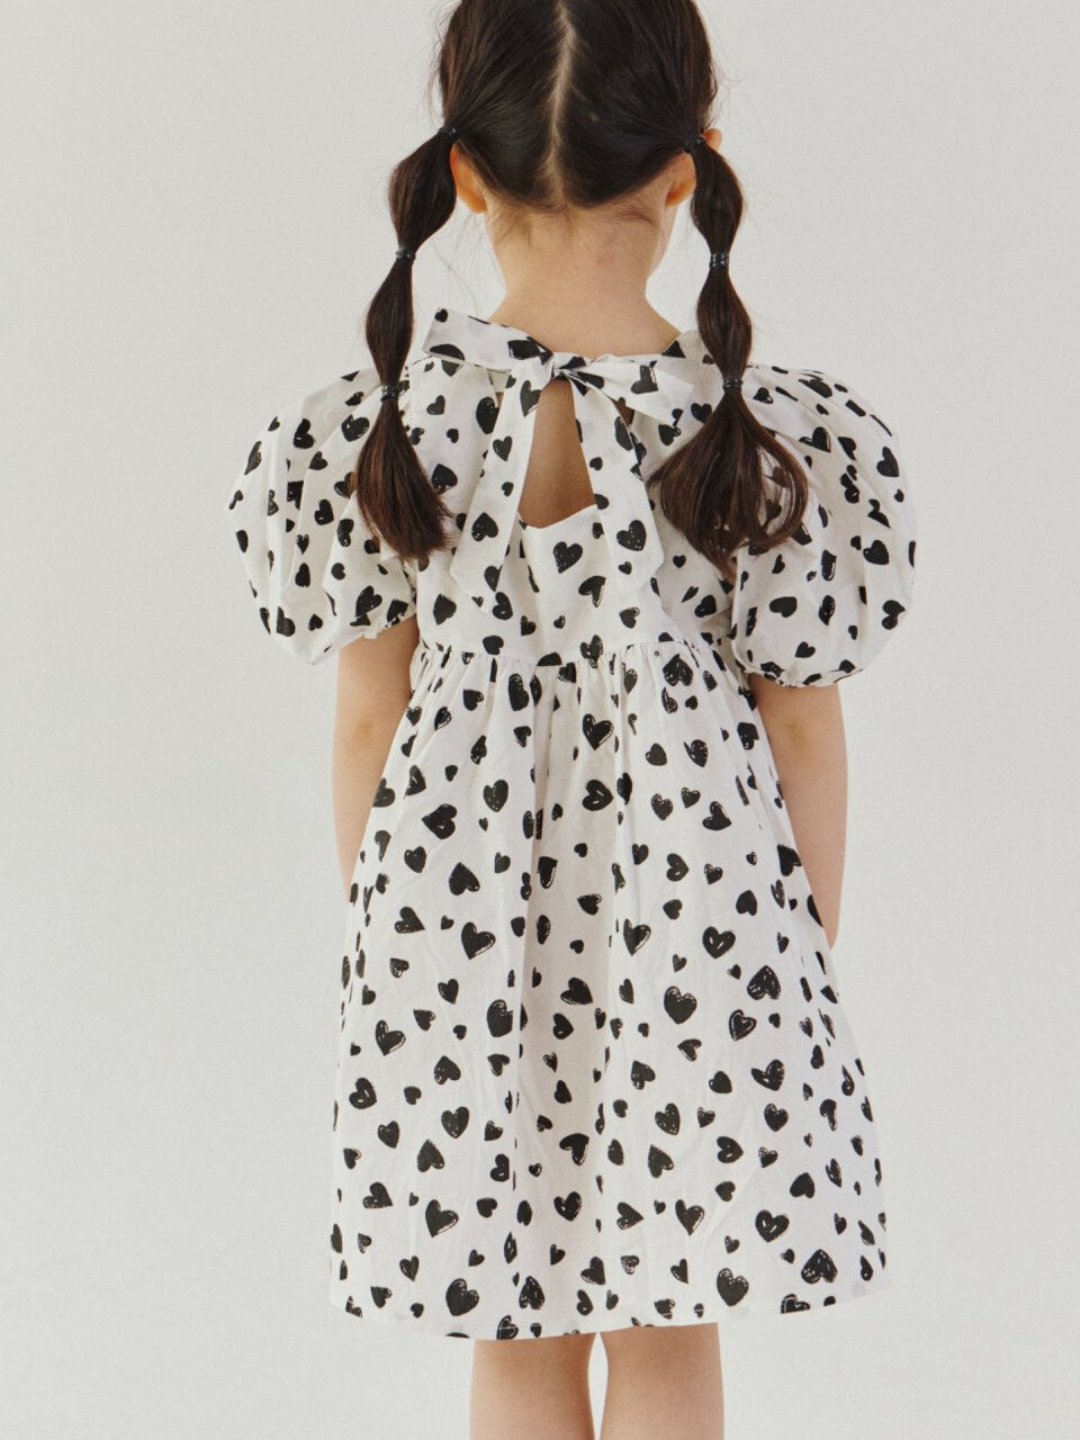 A child wearing a kids' puff-sleeved dress with black hearts on a white background, with bow tied at the neck, back view